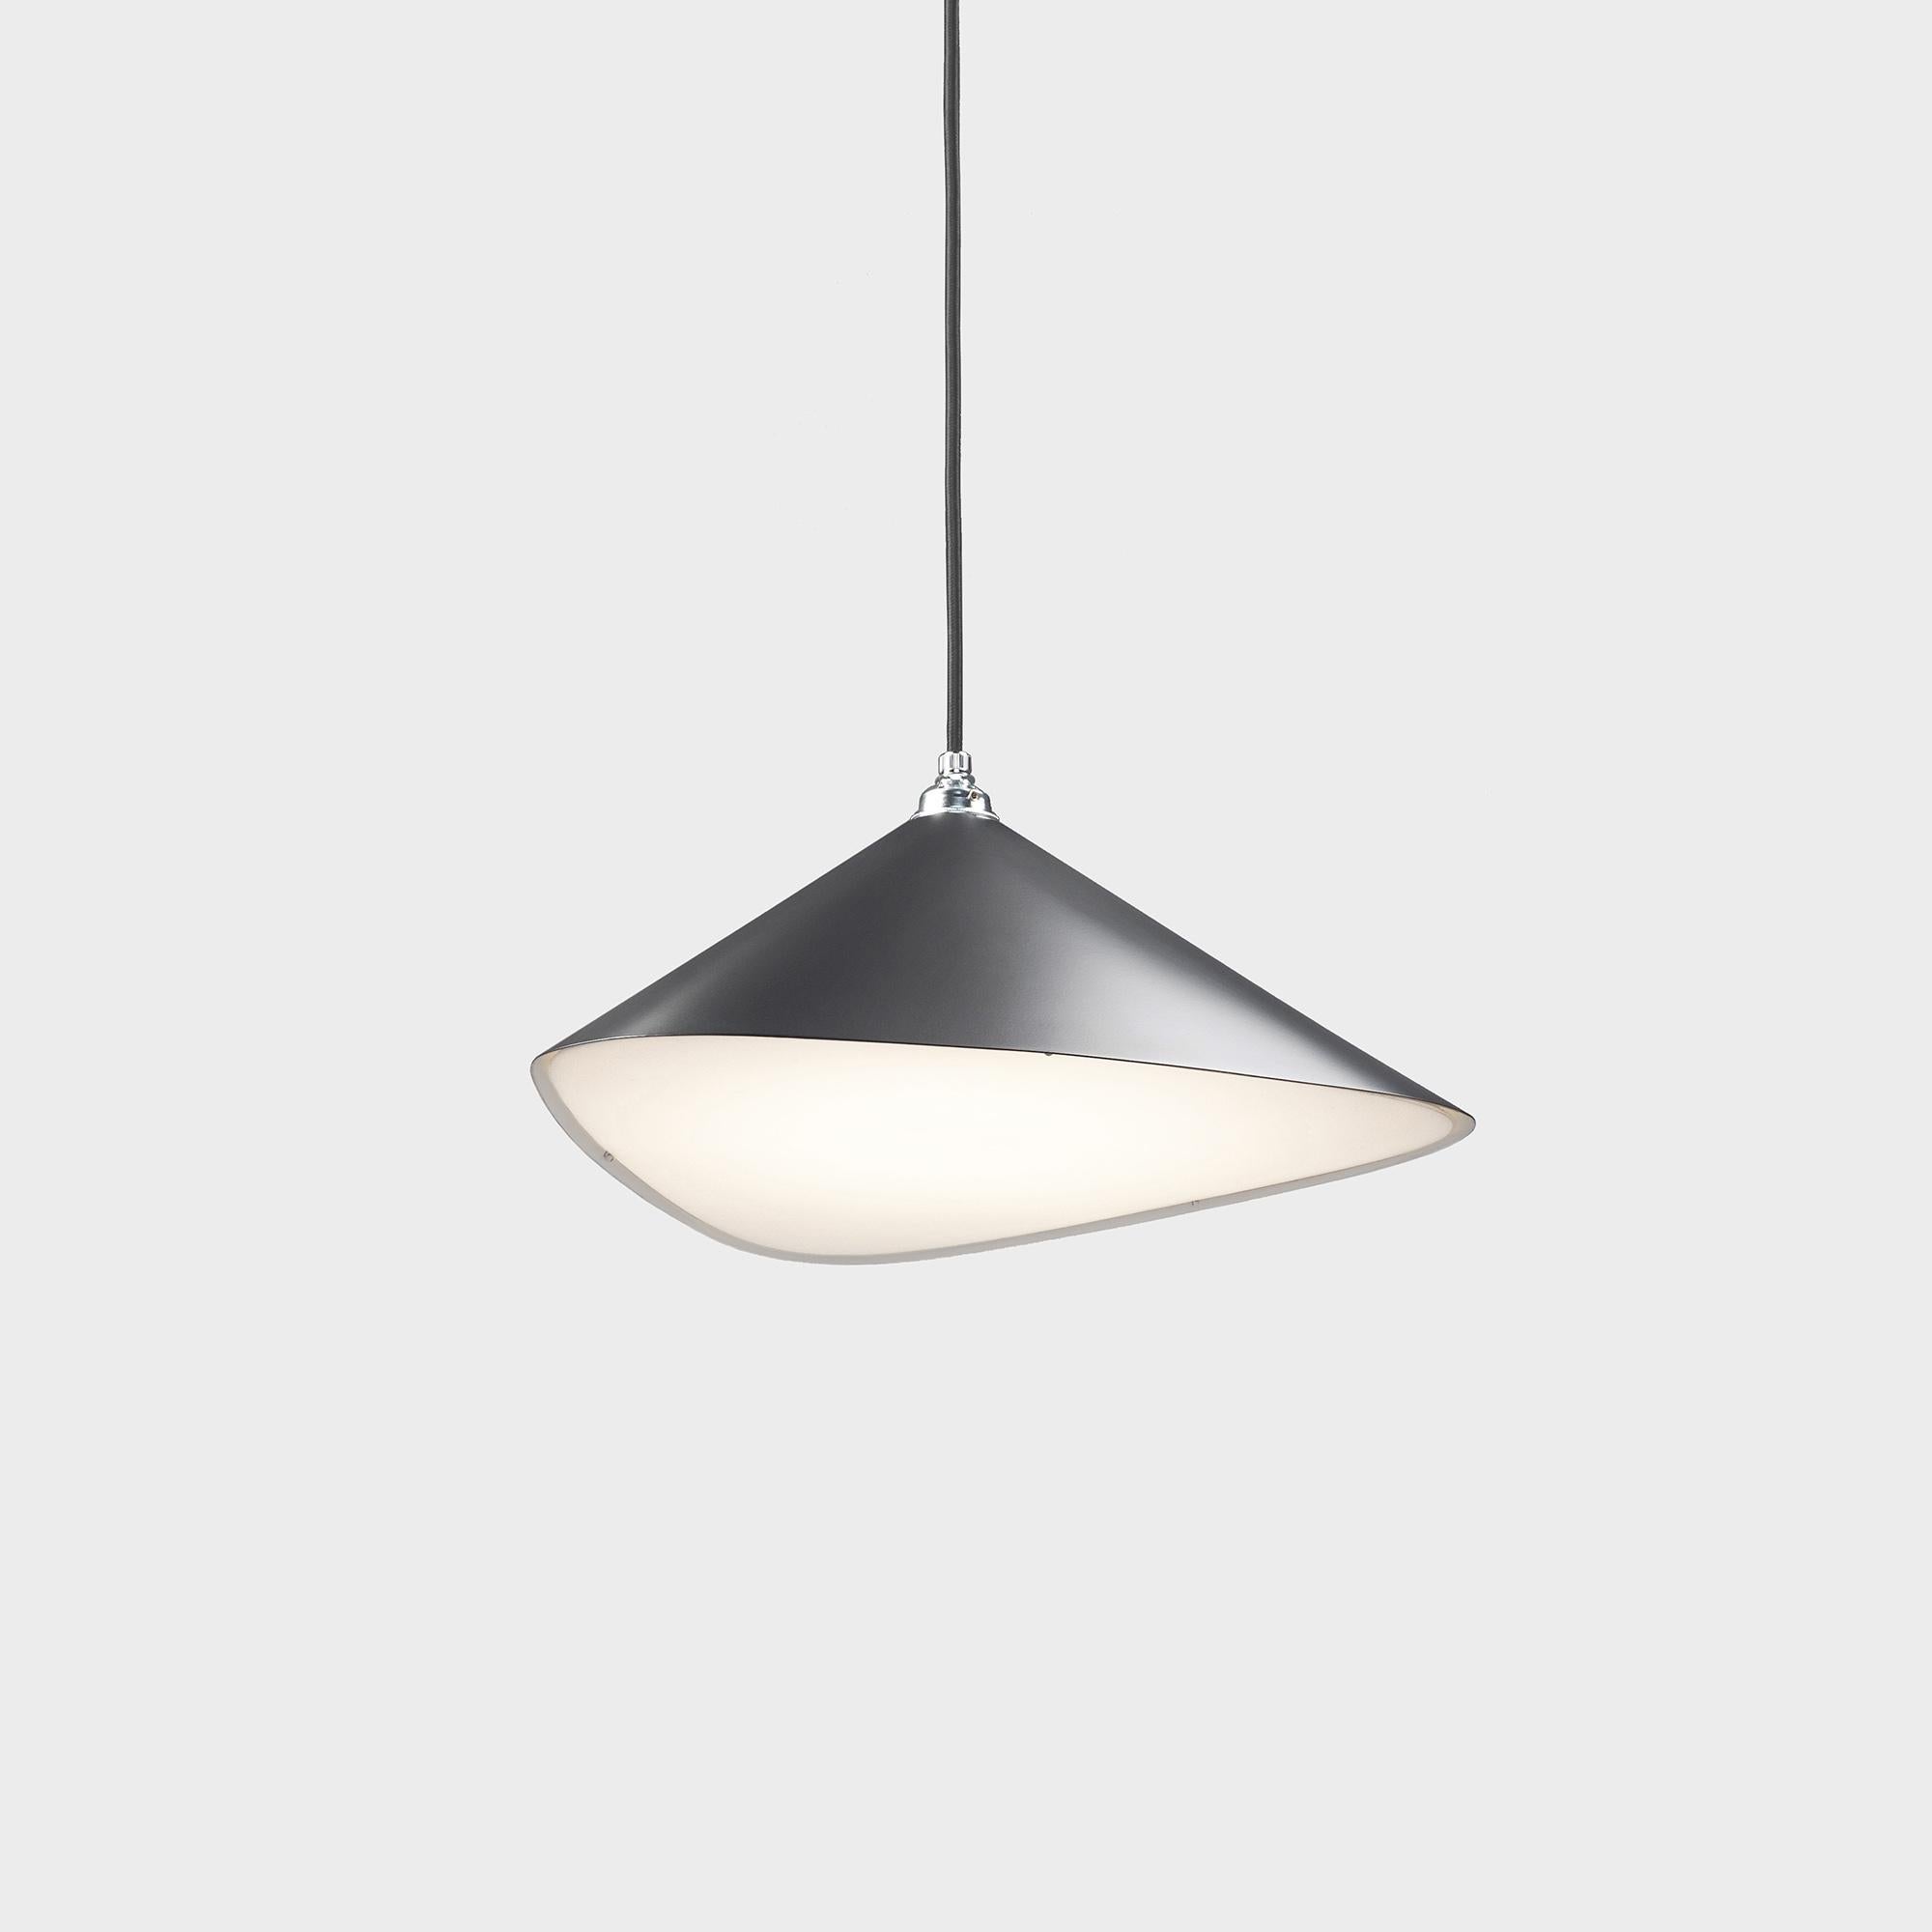 Daniel Becker 'Emily II' pendant lamp in anthracite for Moss Objects. Designed by Berlin luminary Daniel Becker and handmade to order using mid-century manufacturing techniques. Executed in high-quality sheet metal with up to ten layers glossy or